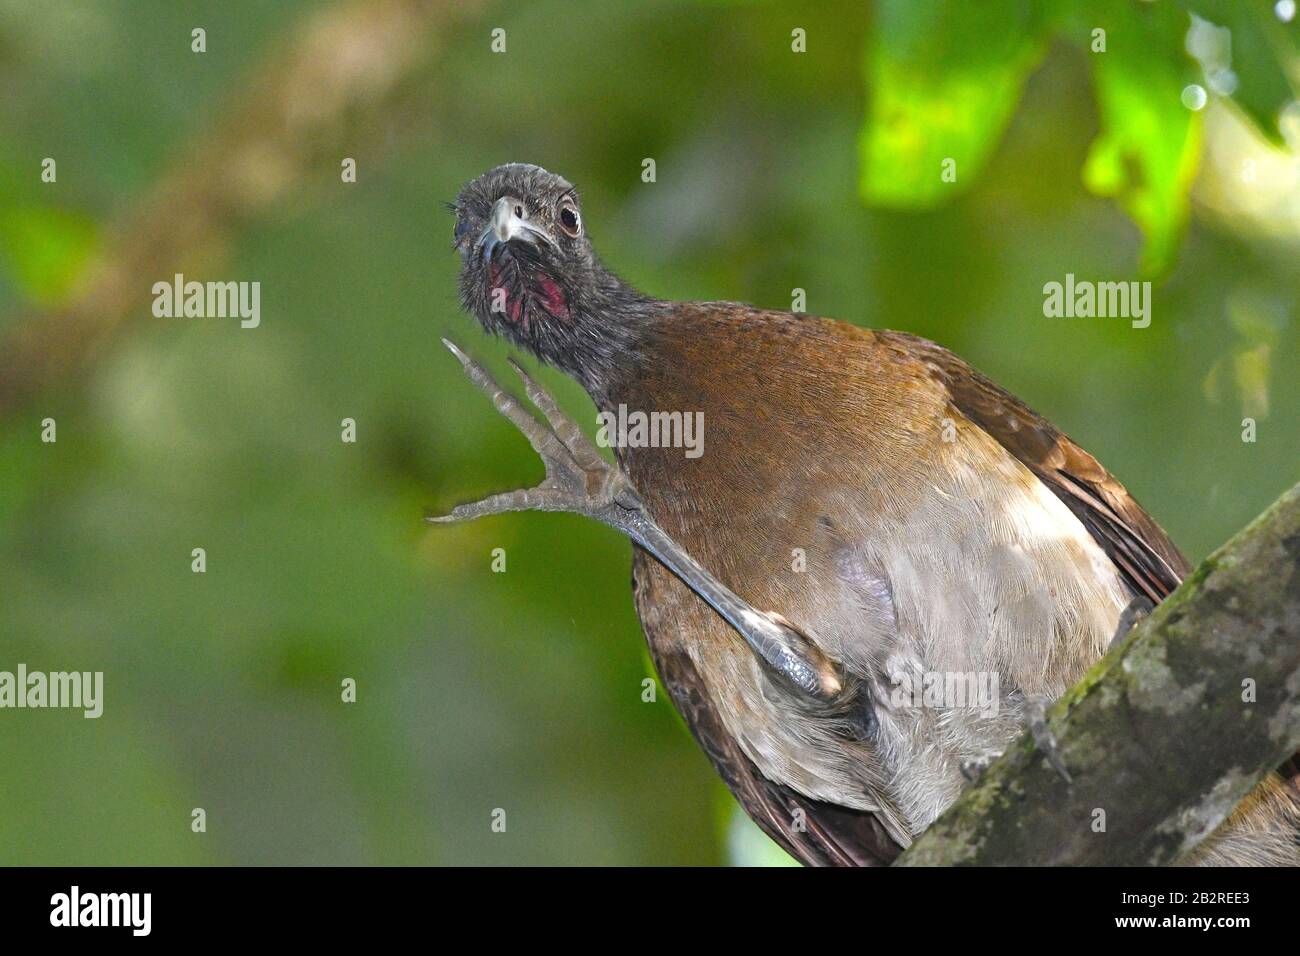 Dusky-legged Guan (Penelope obscura) scratching in Costa Rican forest Stock Photo